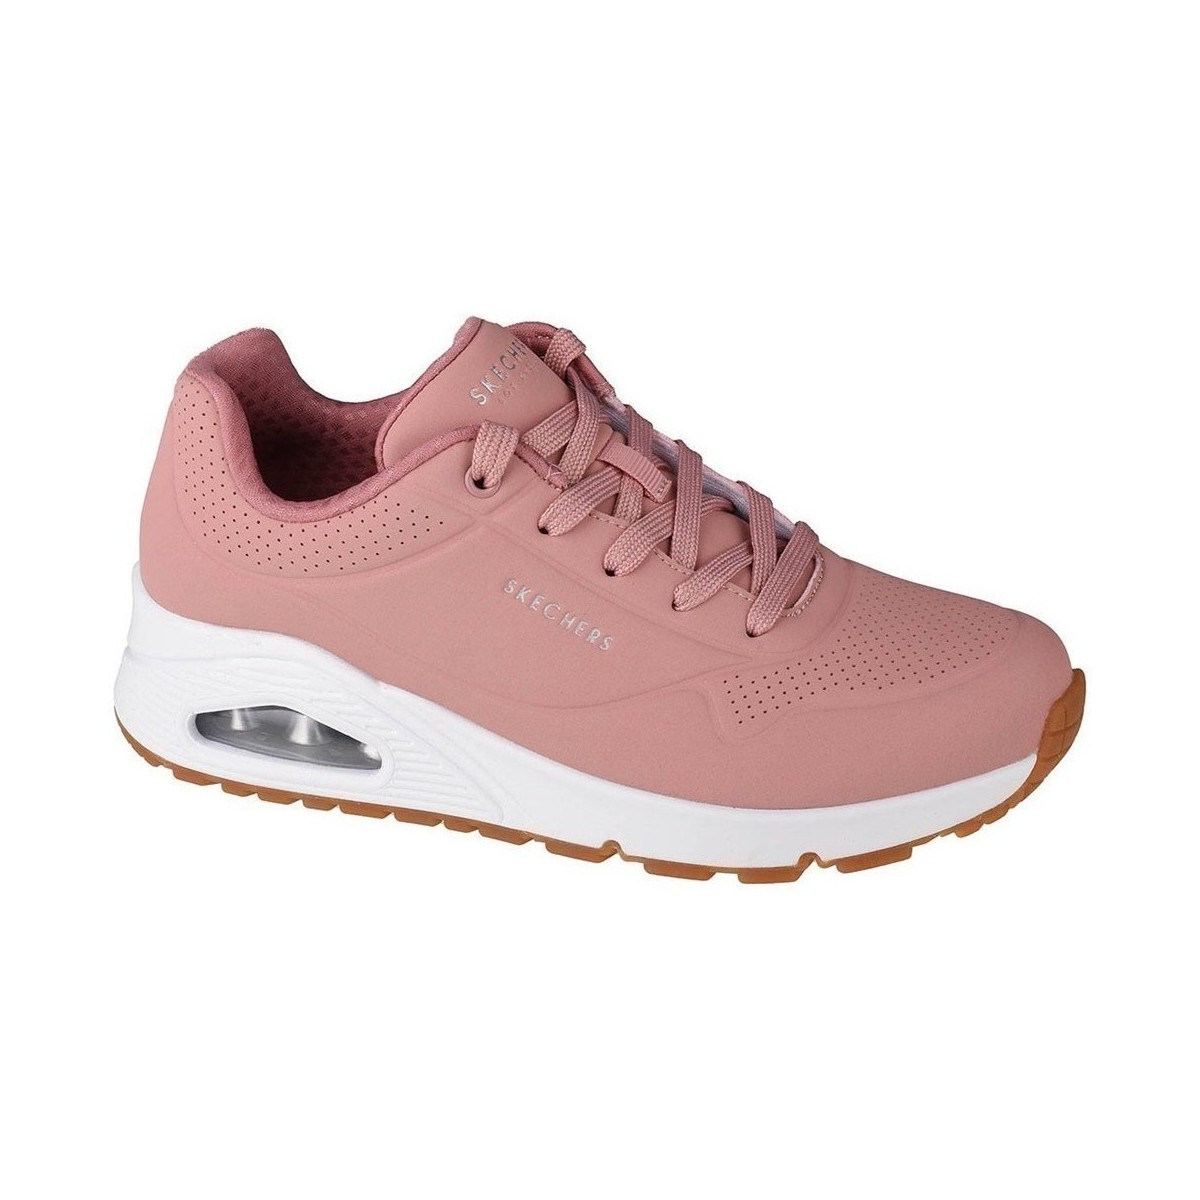 Chaussures Femme 40 тм skechers Unostand ON Air Rose